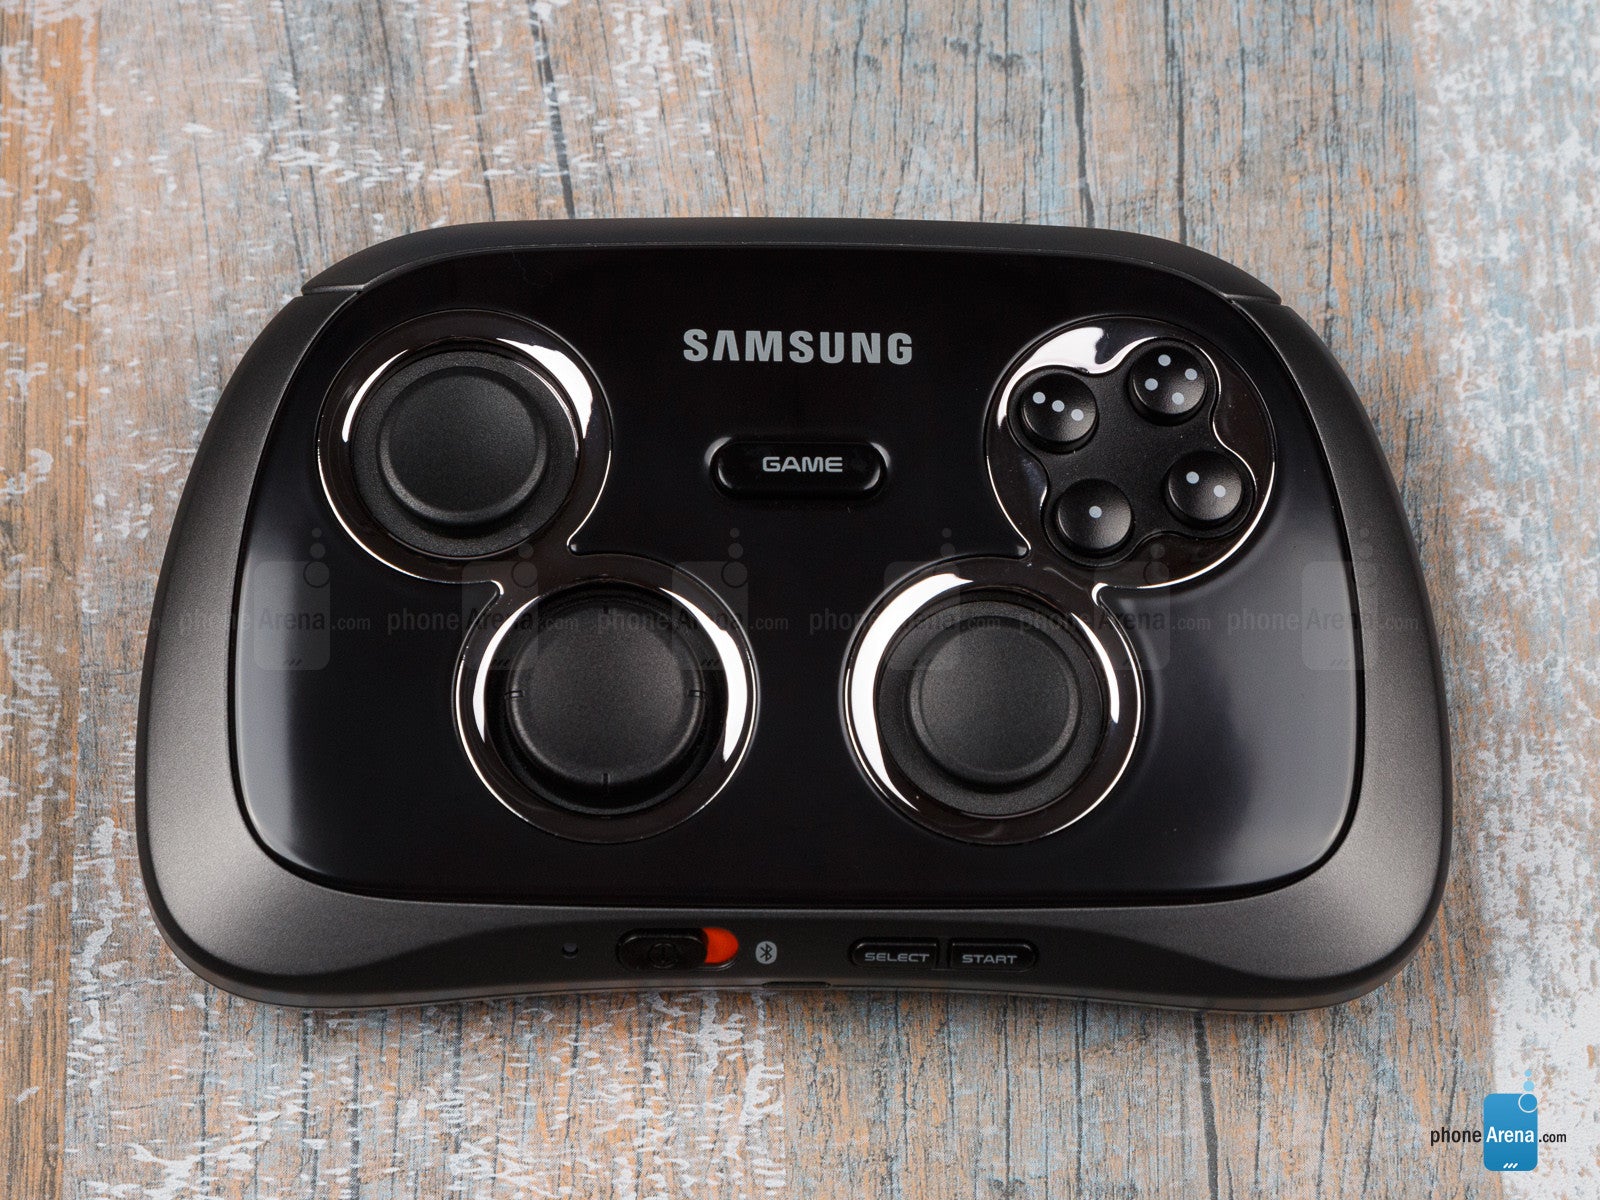 Samsung Android Wireless GamePad hands-on